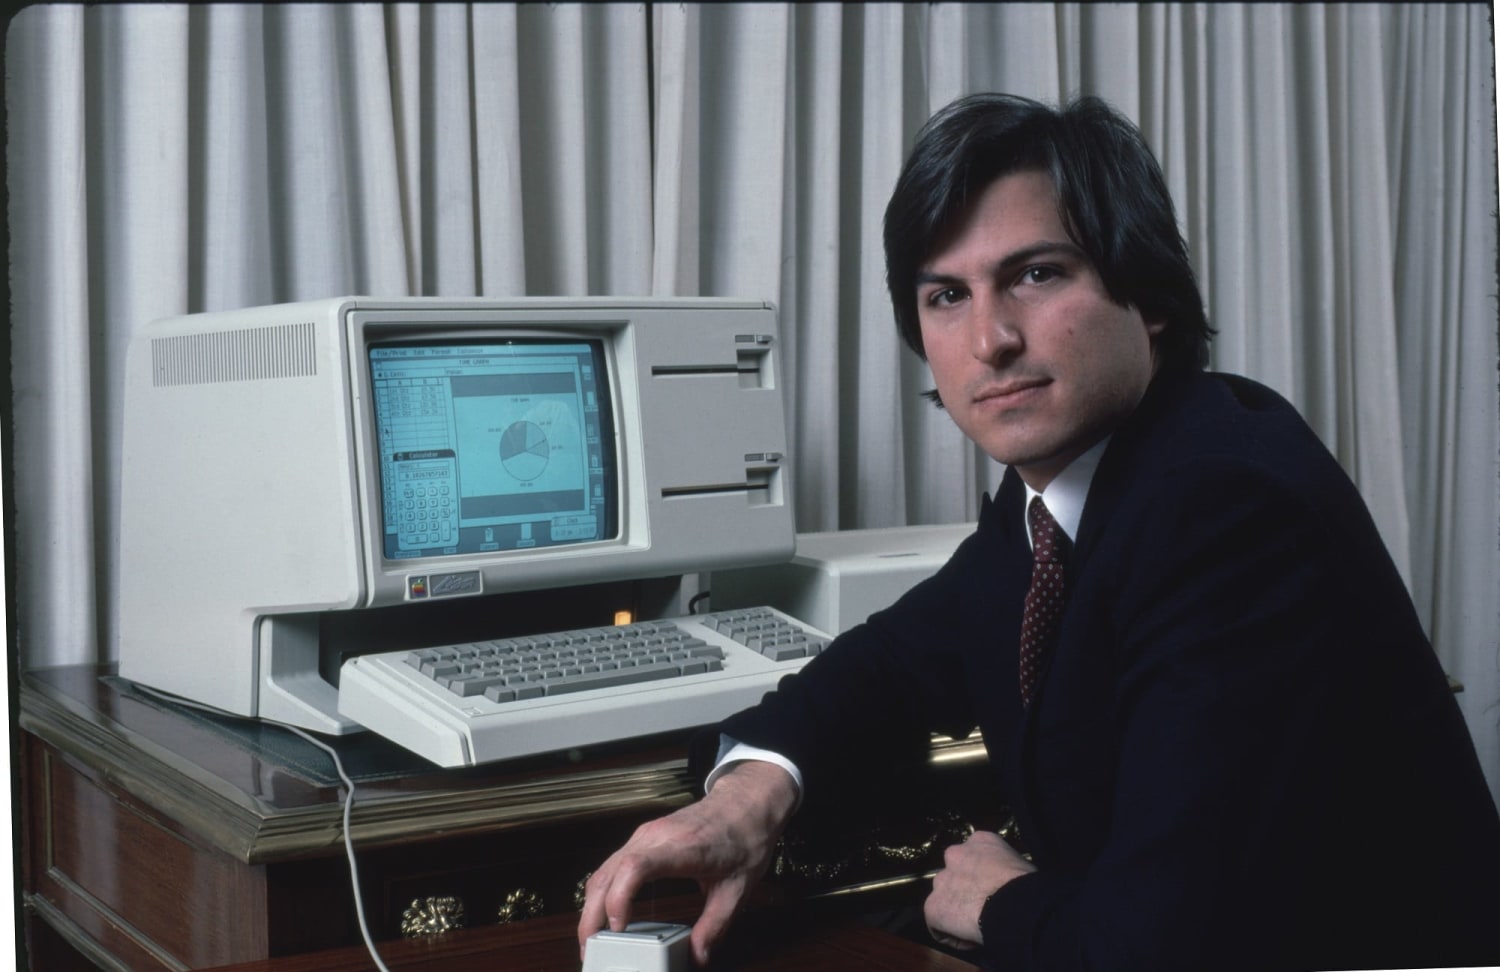 In 1985, Steve Jobs made these eerily accurate predictions about the future of tech